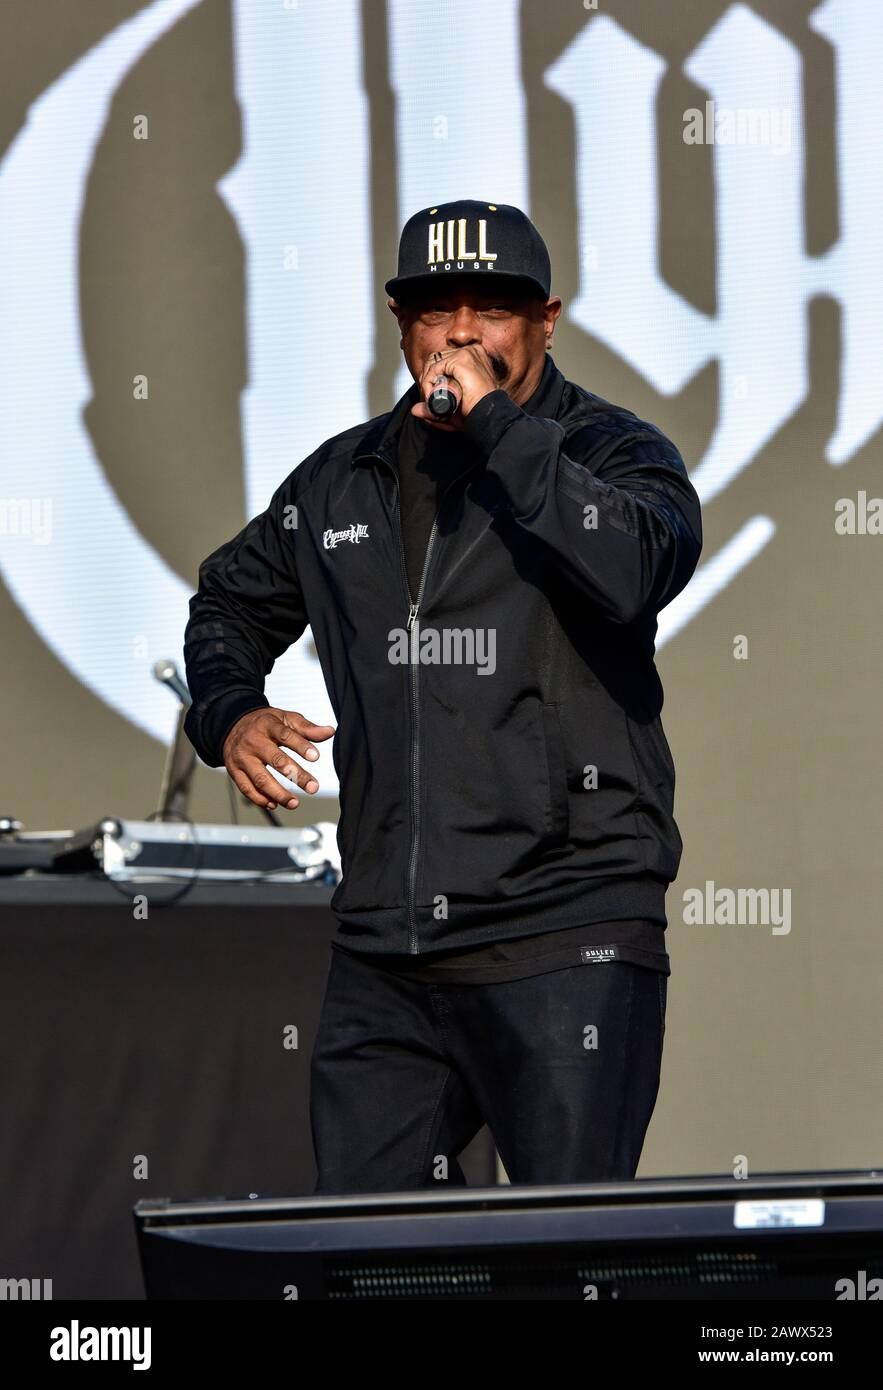 Sen Dog of Cypress Hill on stage at Bottlerock Music Festival In Napa, California. Stock Photo